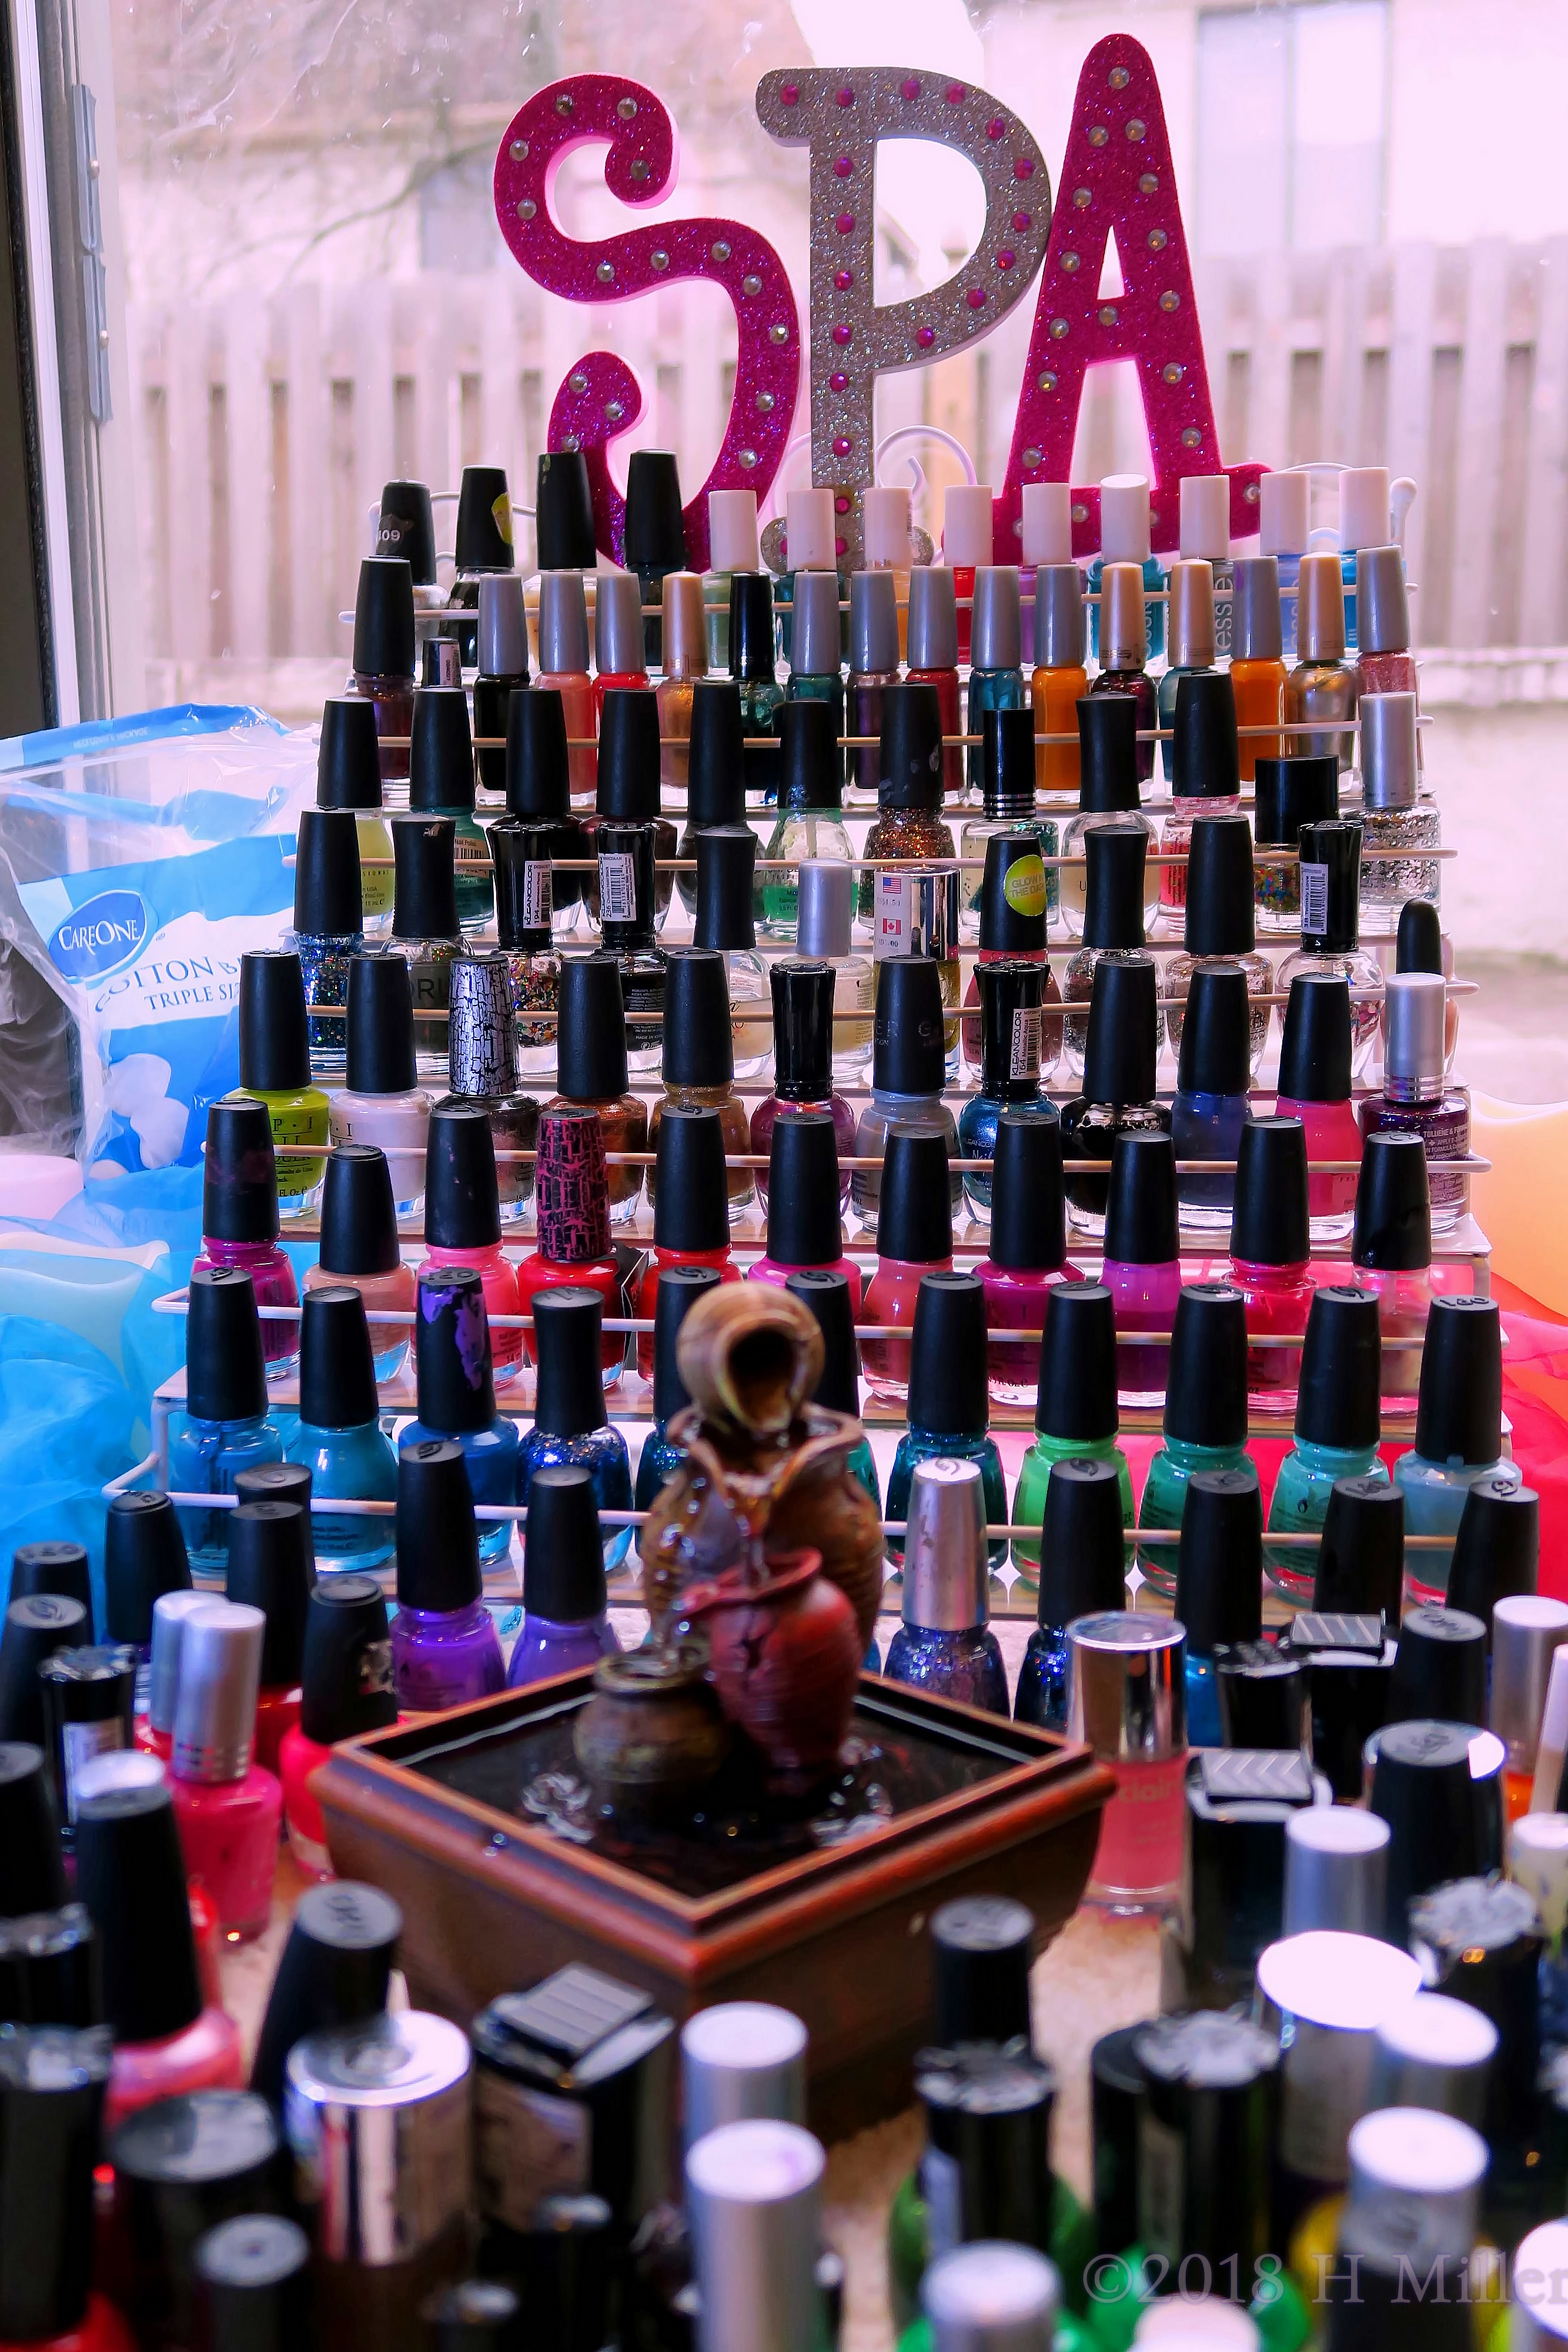 Manicure Treasure Trove Of Diverse Nail Polish Colors For The Spa Party For Girls! 